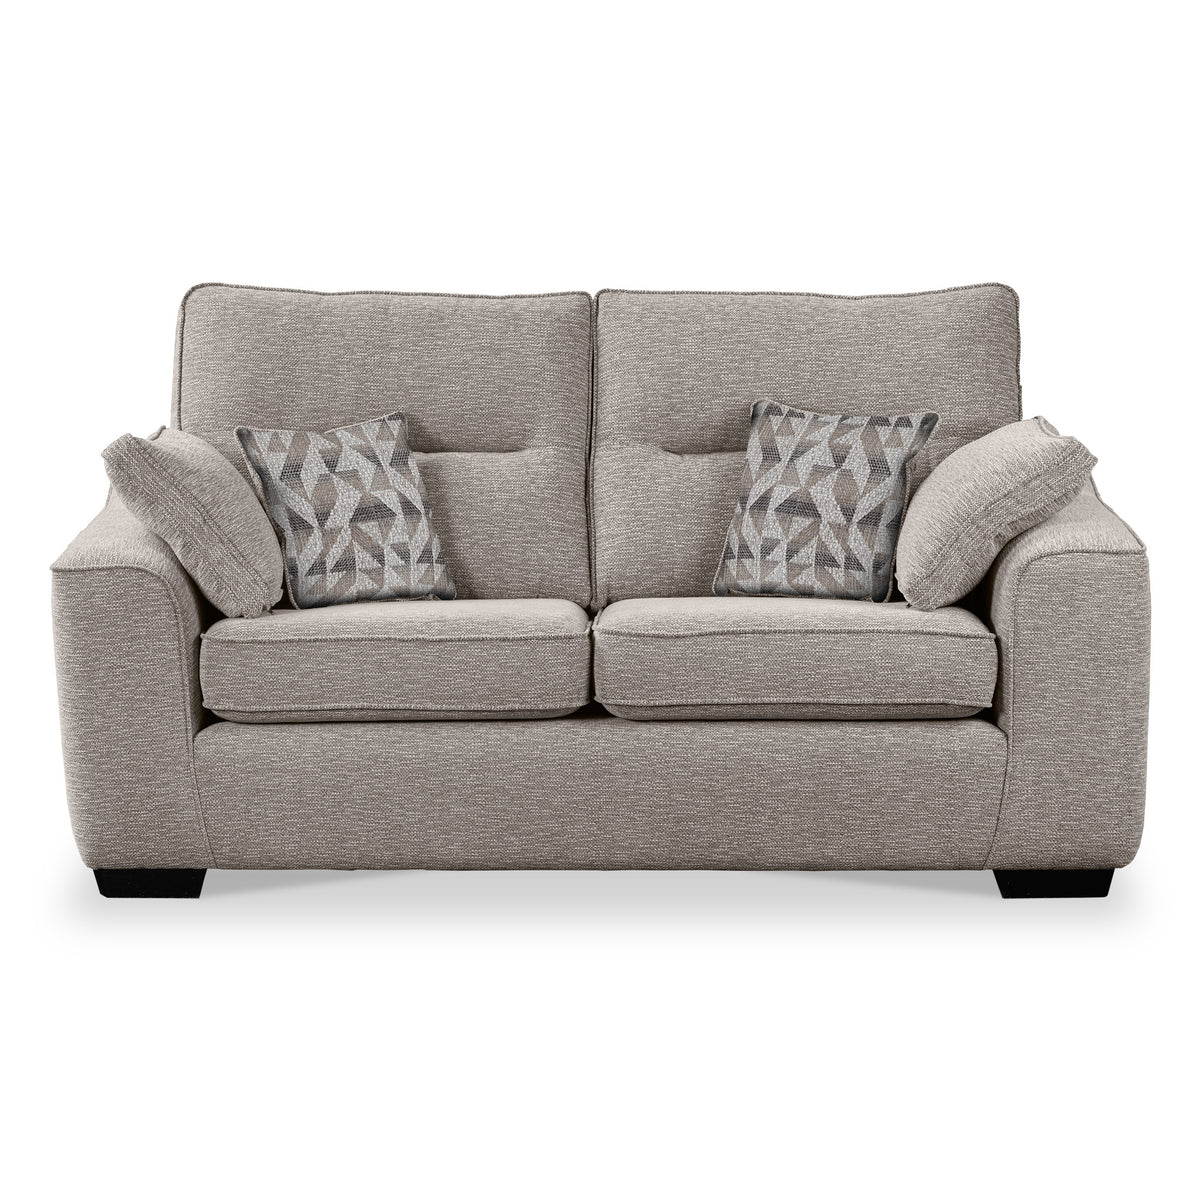 Sudbury Taupe 2 Seater Sofabed with Oatmeal Scatter Cushions